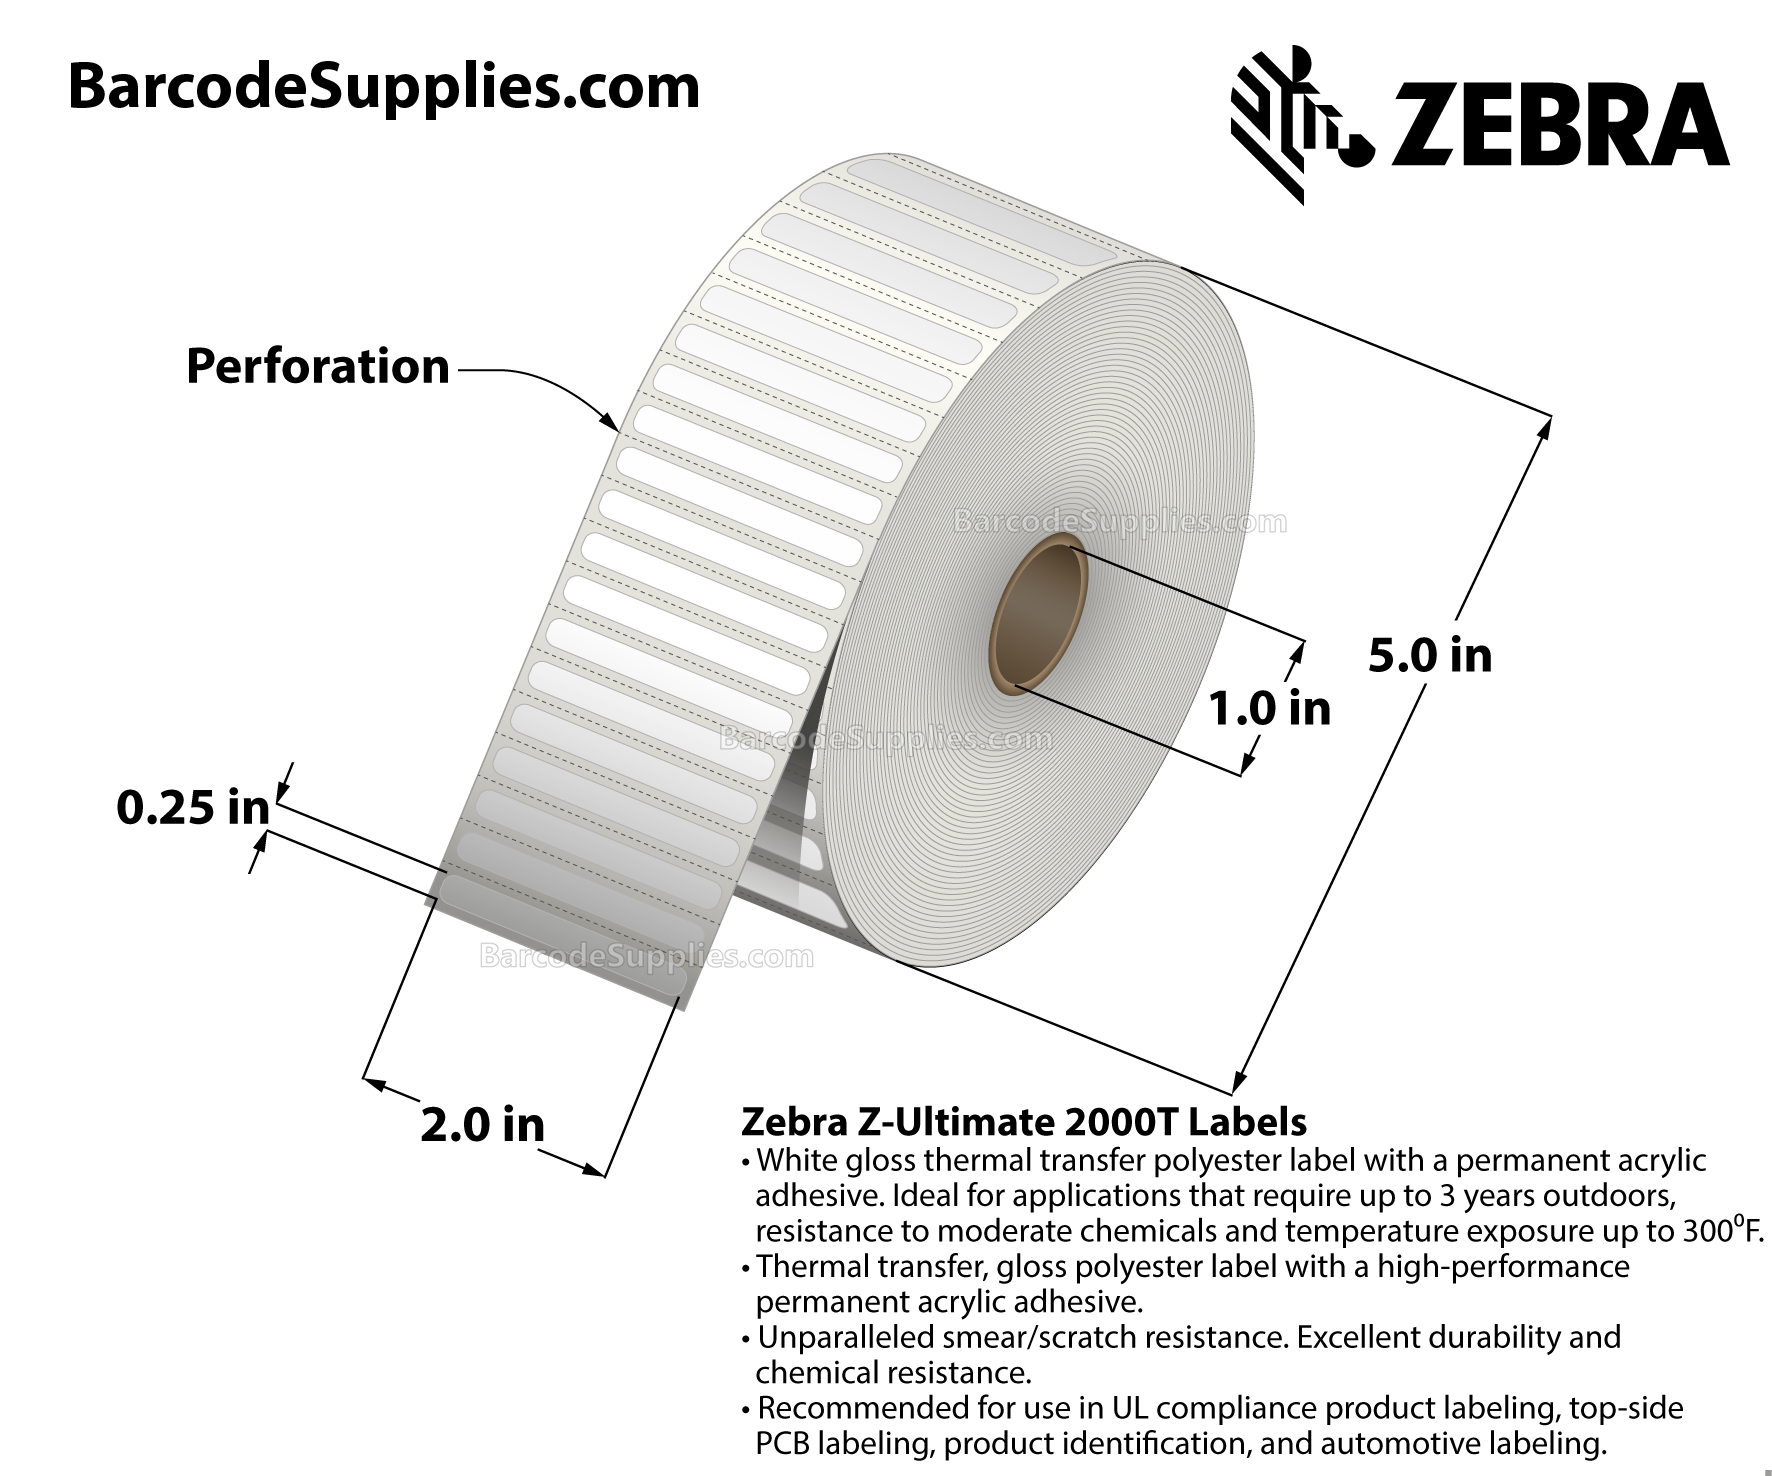 2 x 0.25 Thermal Transfer White Z-Ultimate 2000T Labels With Permanent Adhesive - Perforated - 2500 Labels Per Roll - Carton Of 1 Rolls - 2500 Labels Total - MPN: 10023033